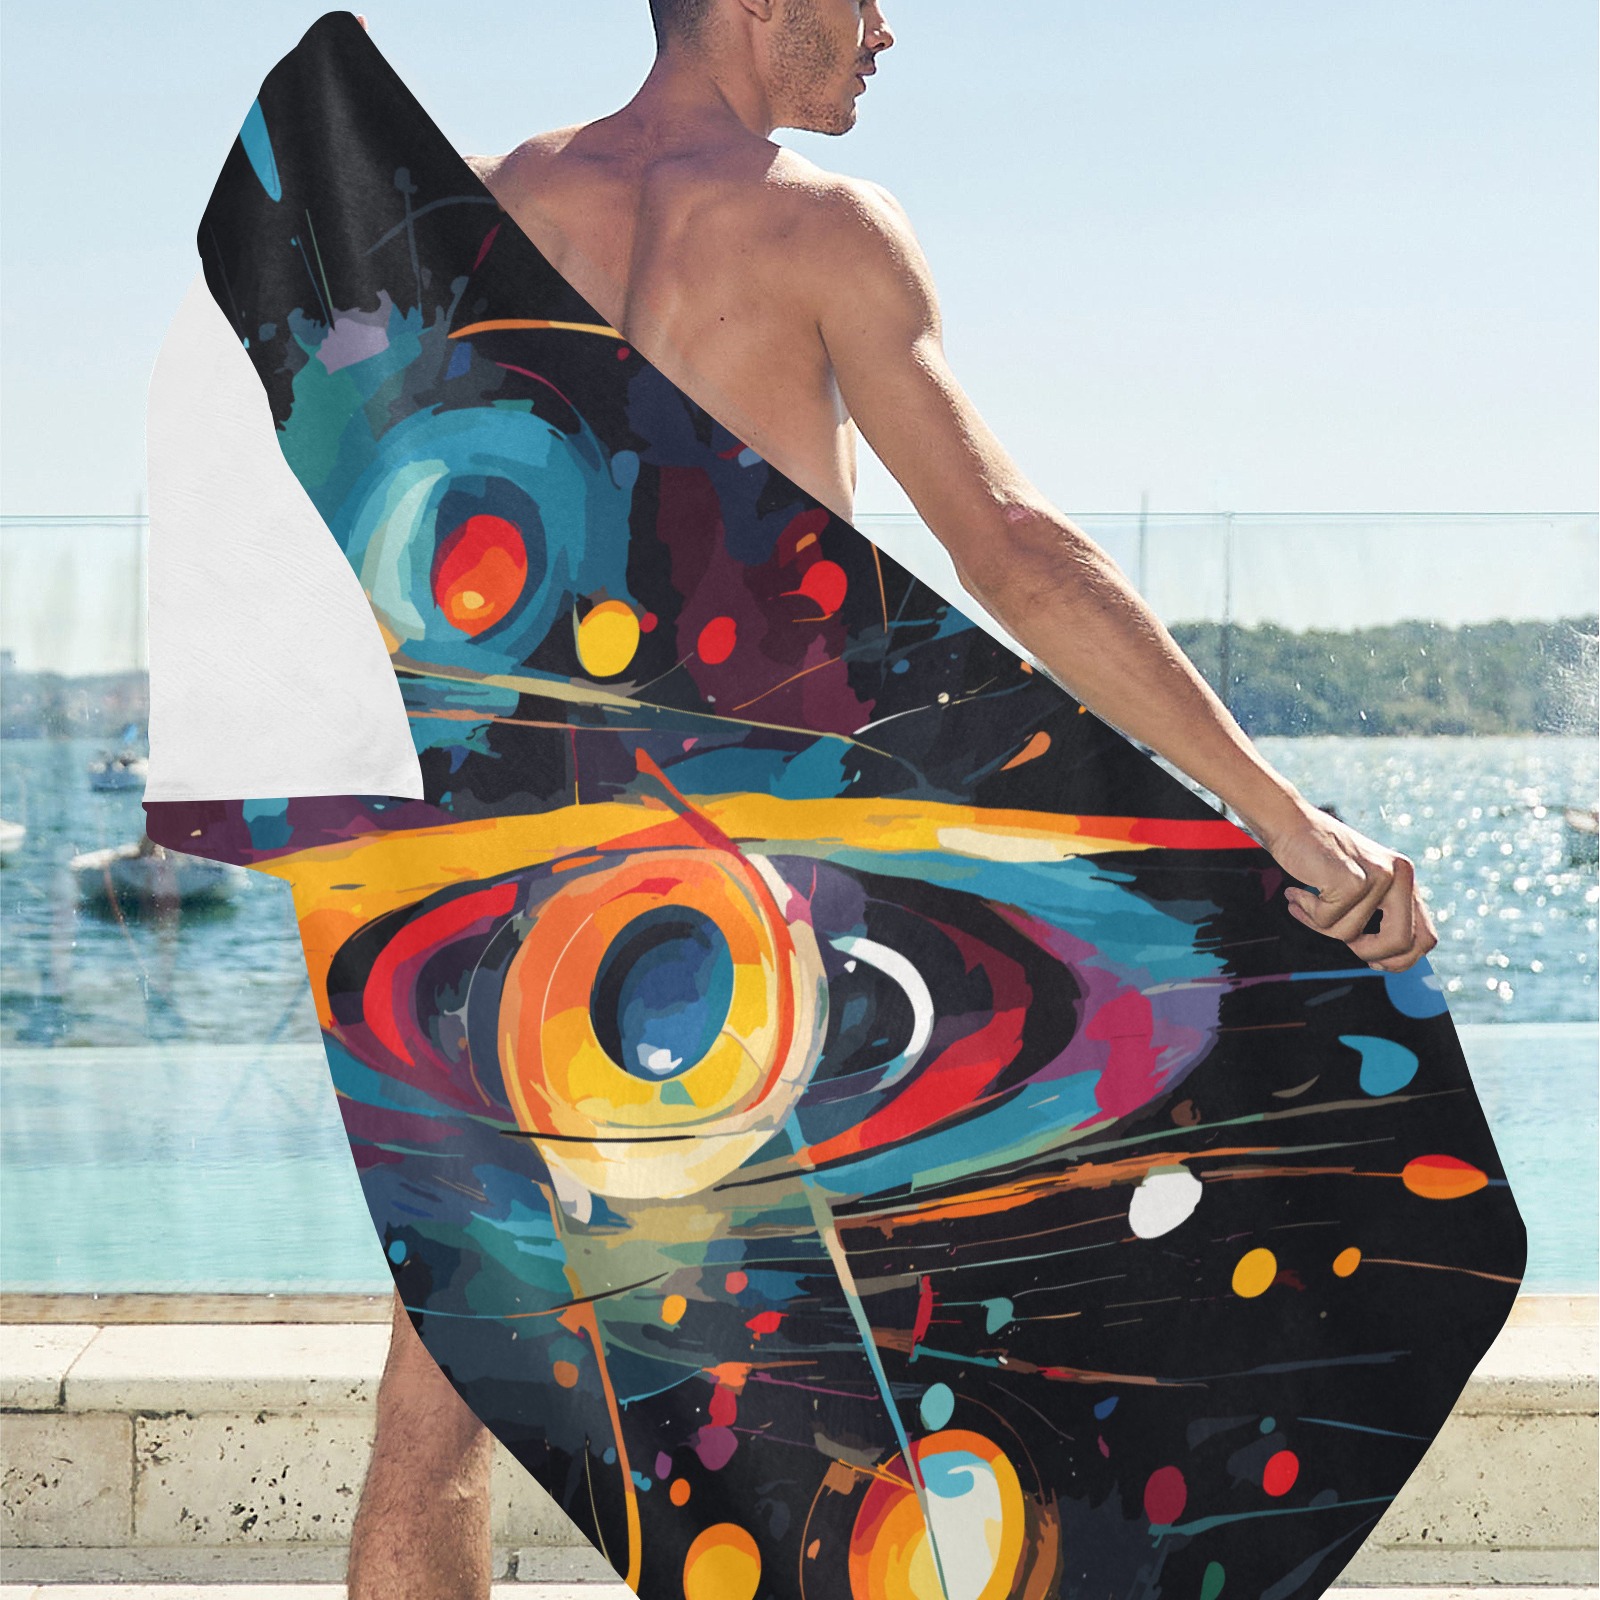 Galactical shapes, planets, stars in black space Beach Towel 32"x 71"